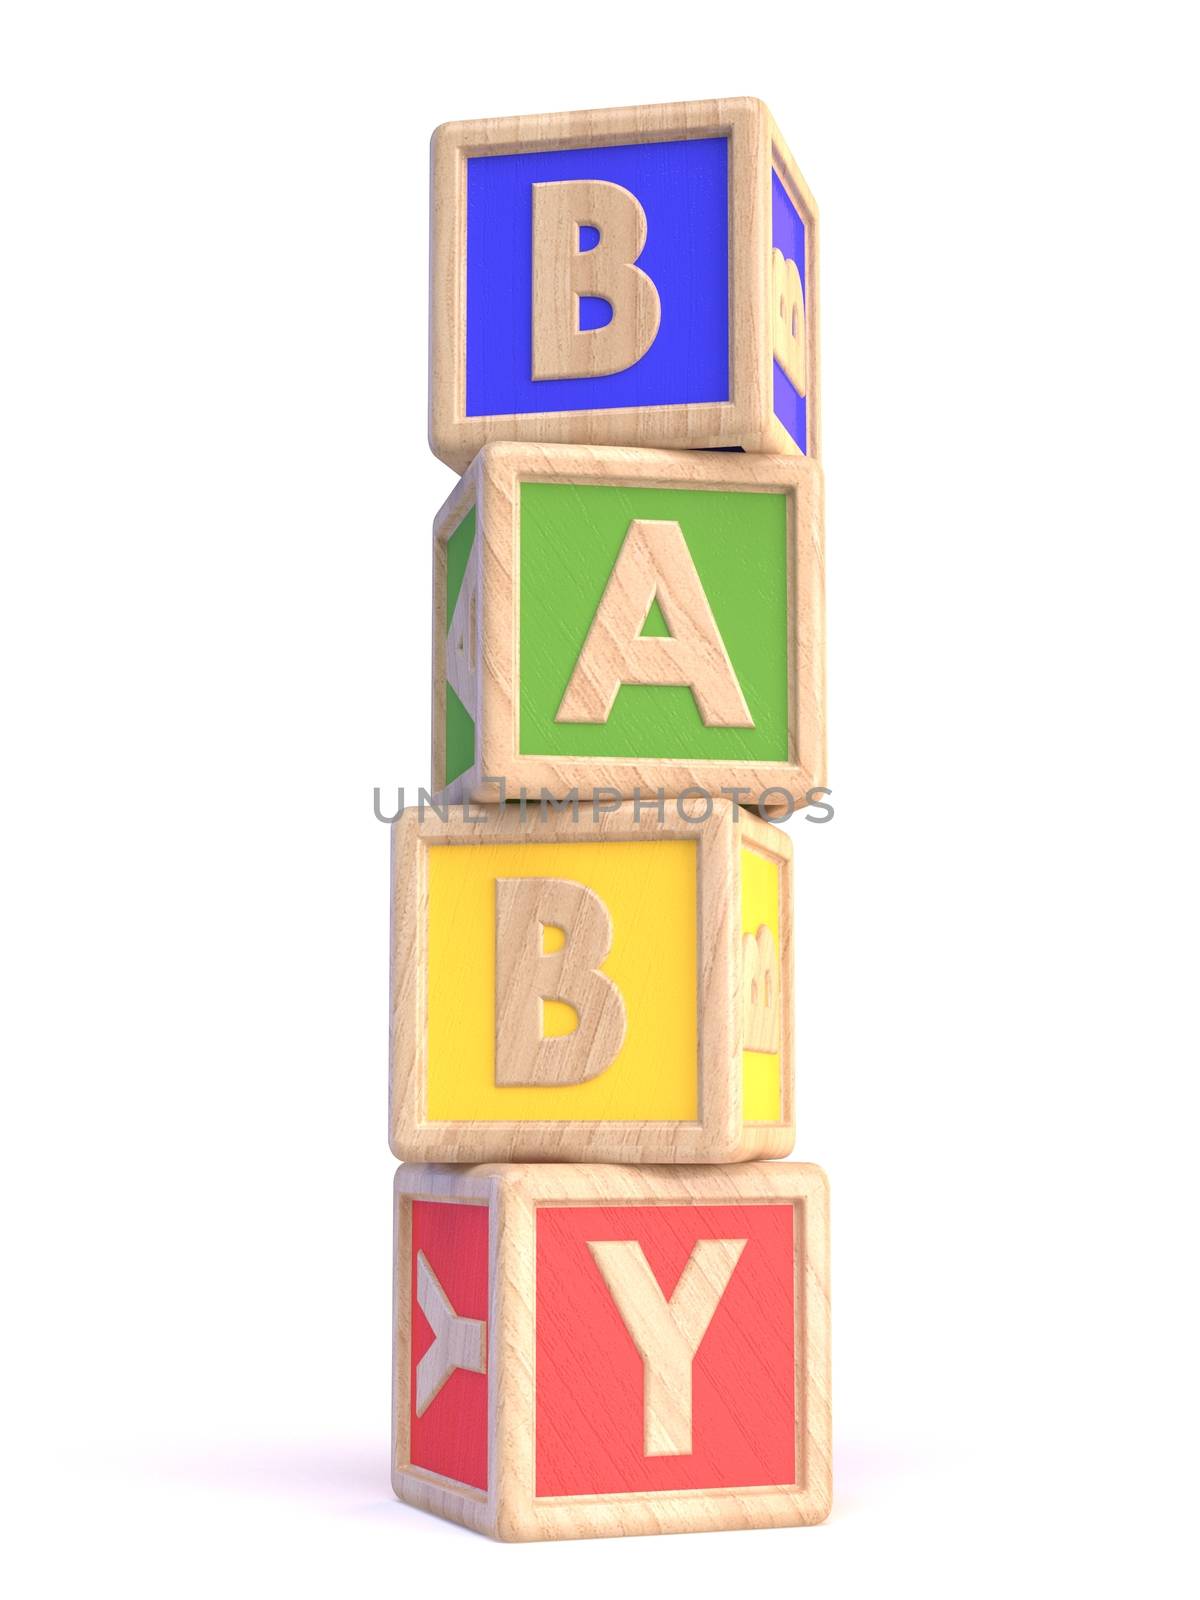 Word BABY made of wooden blocks toy vertical 3D by djmilic